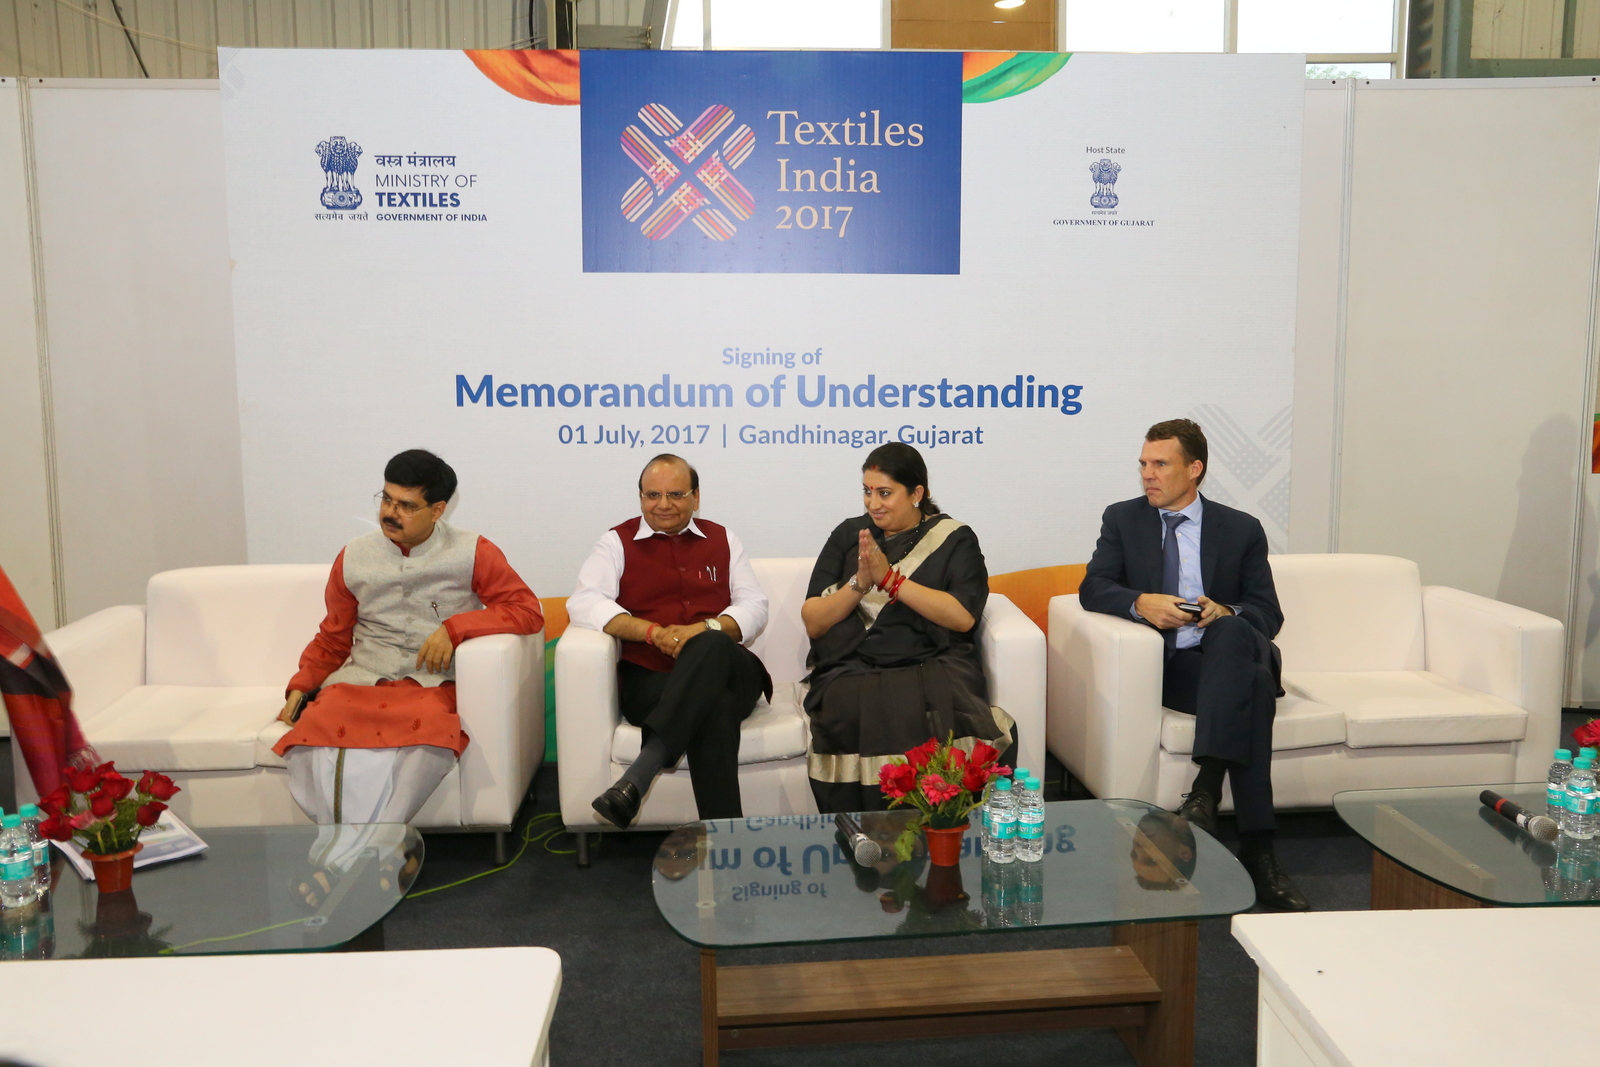 Textiles India 2017: 65 MoUs signed in the presence of Union Textiles Minister